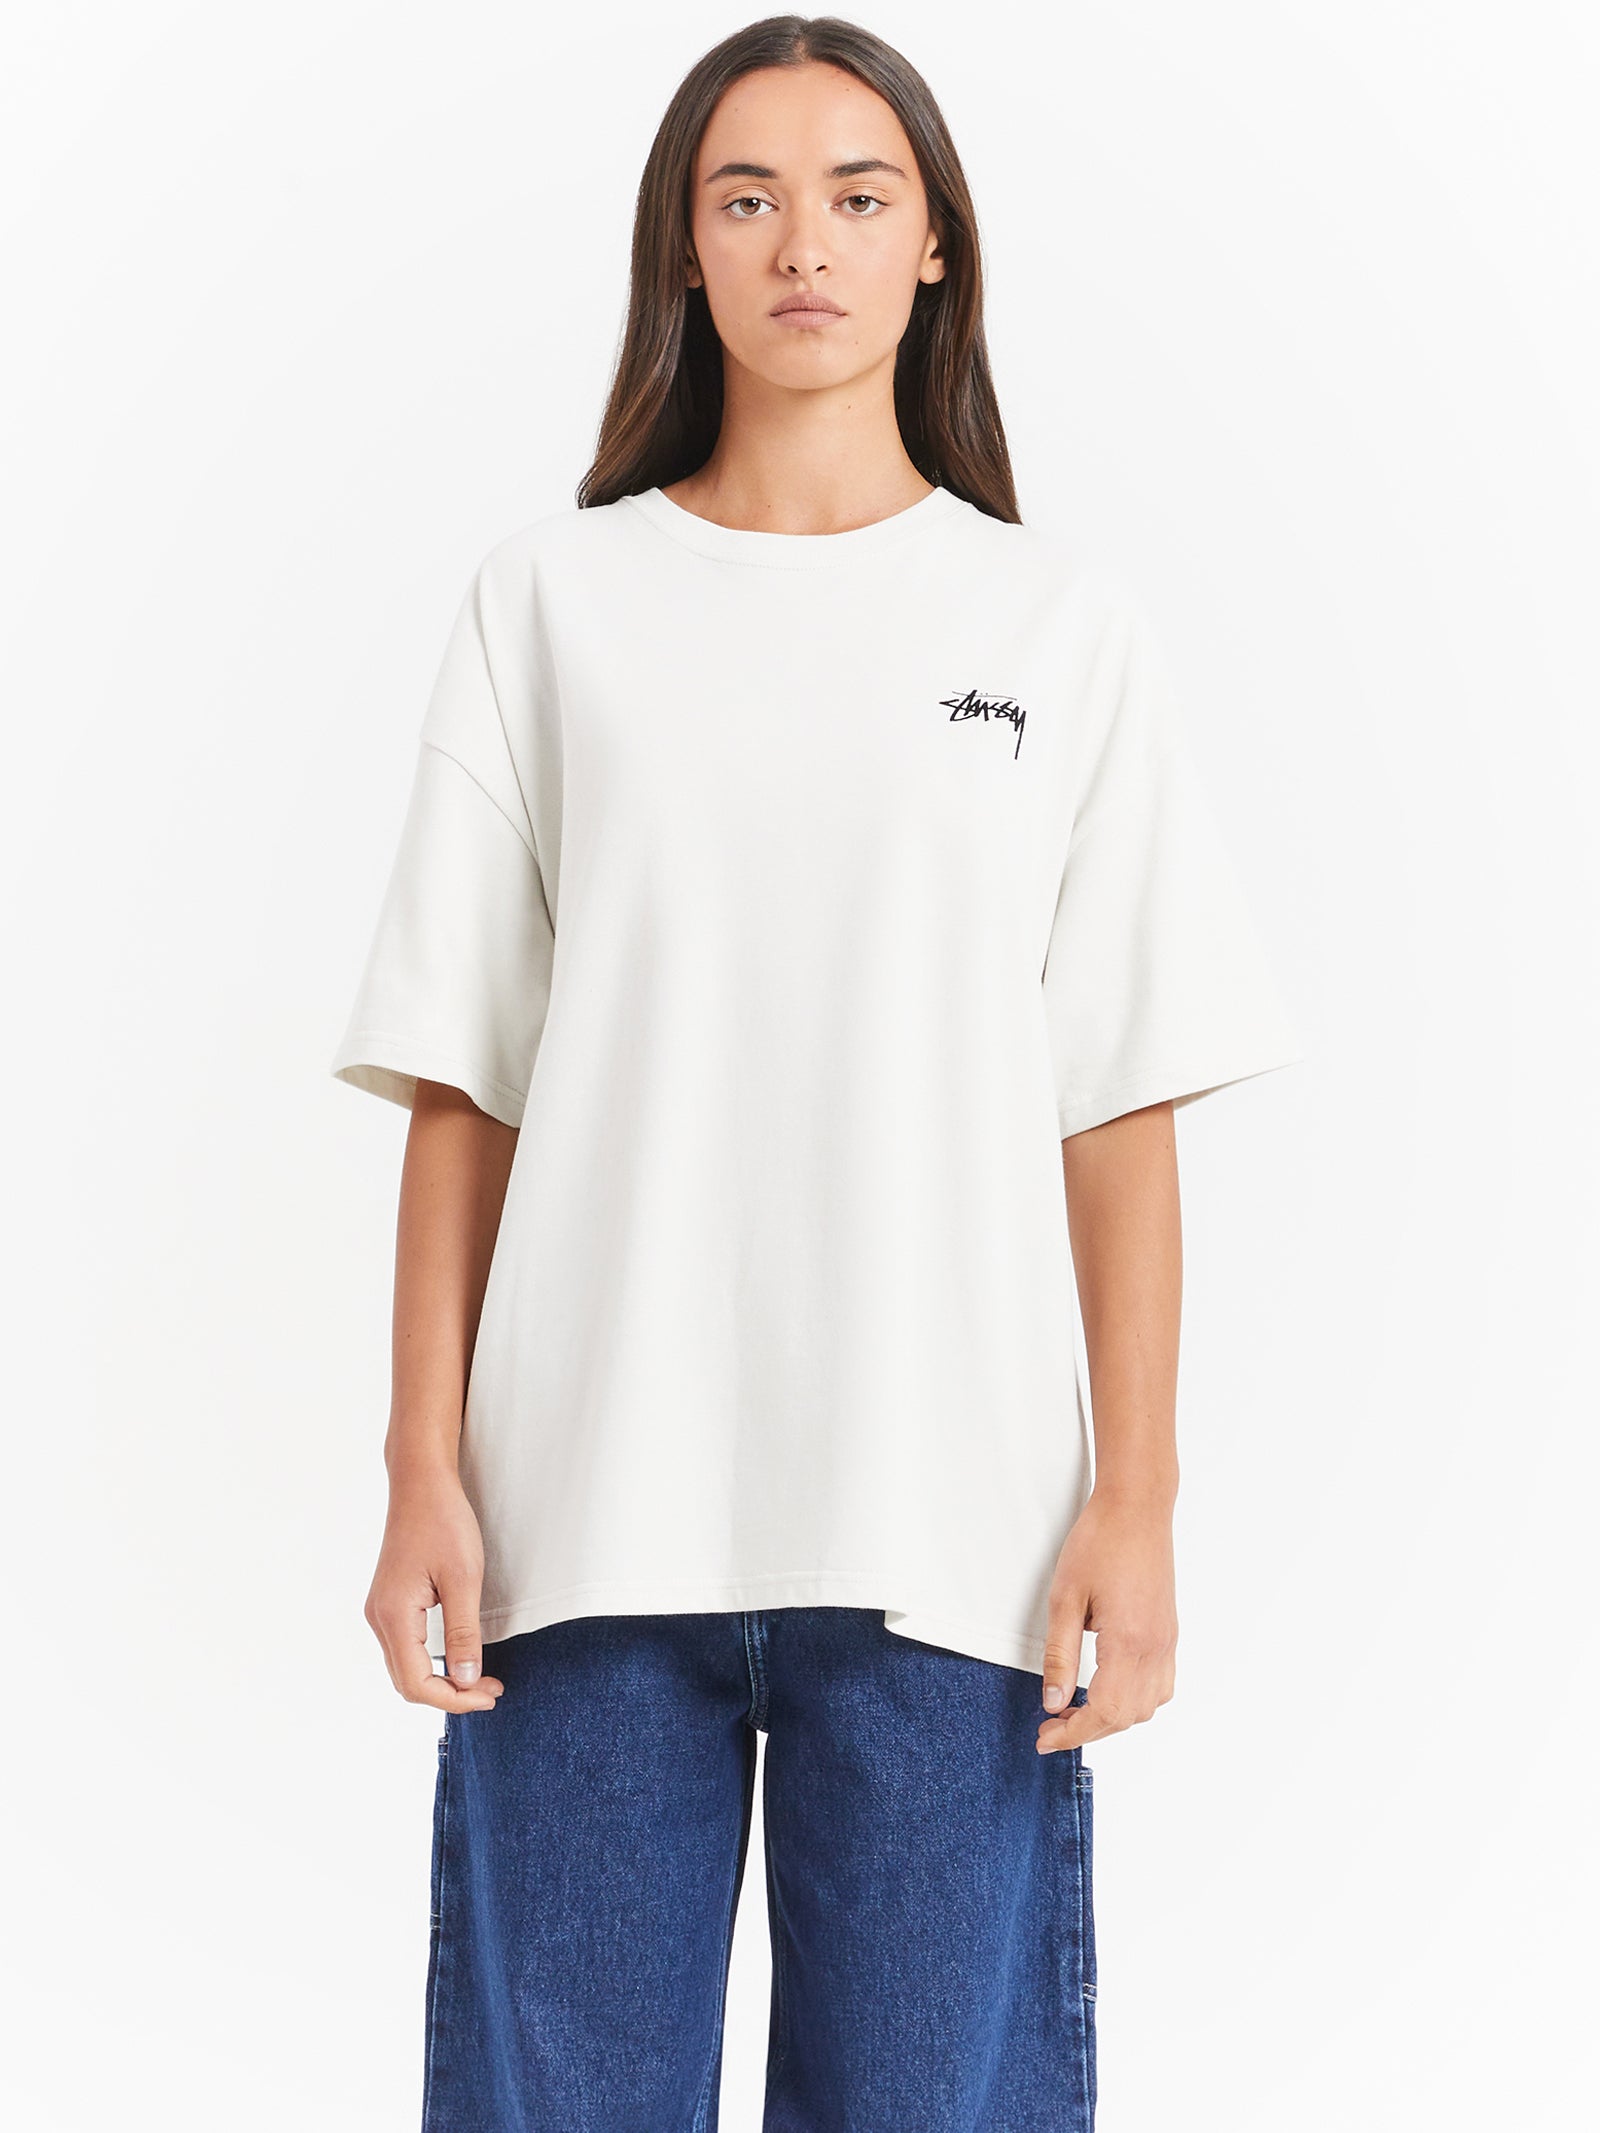 Chanel 5 Heavyweight Relaxed T-Shirt in Winter White